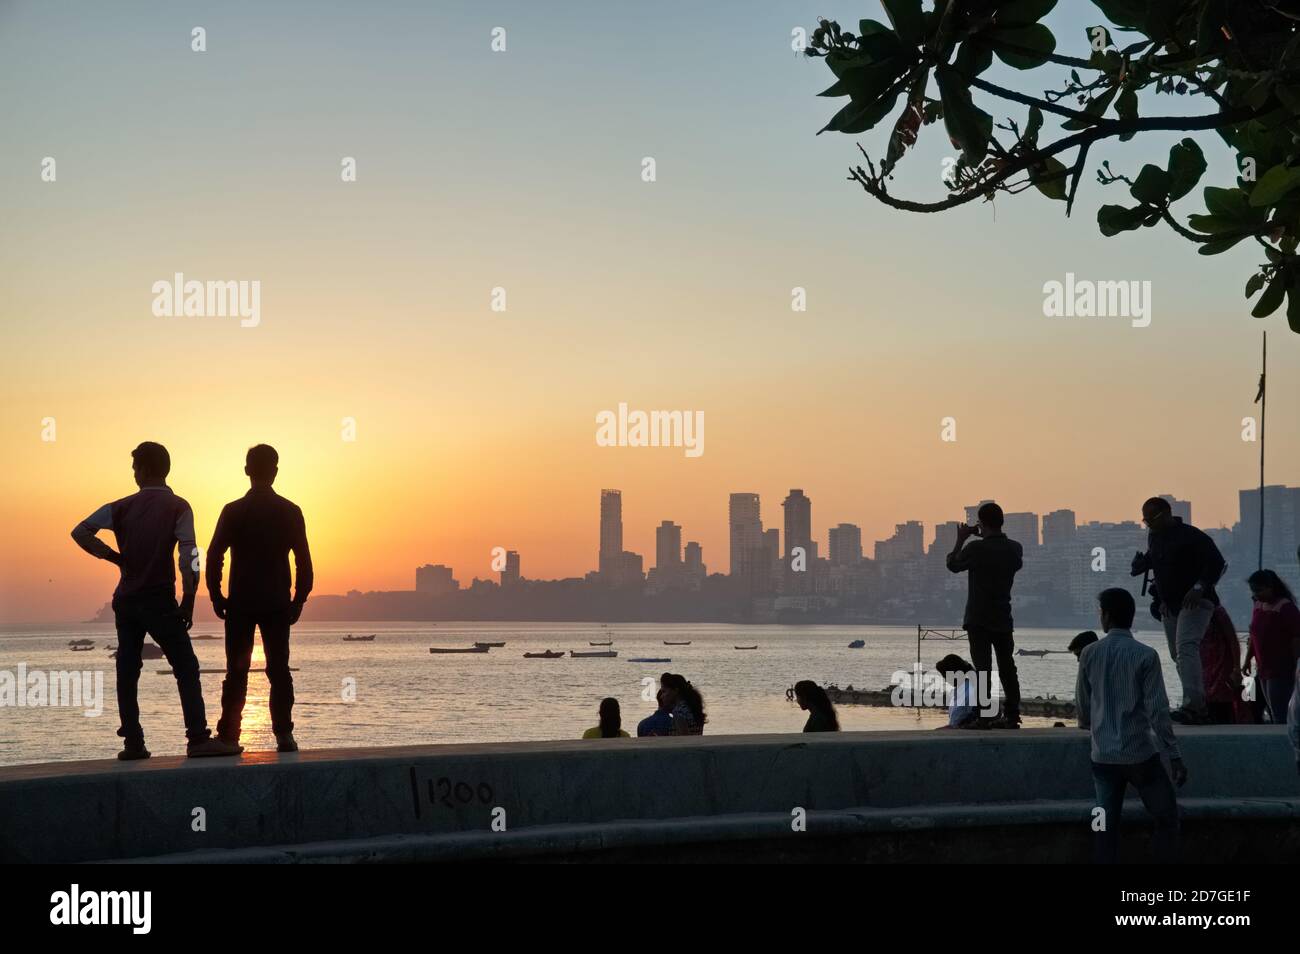 During sunset over the Arabian Sea at Marine Drive, near Chowpatty Beach, Mumbai, local sightseers enjoy the view while standing on the embankment Stock Photo